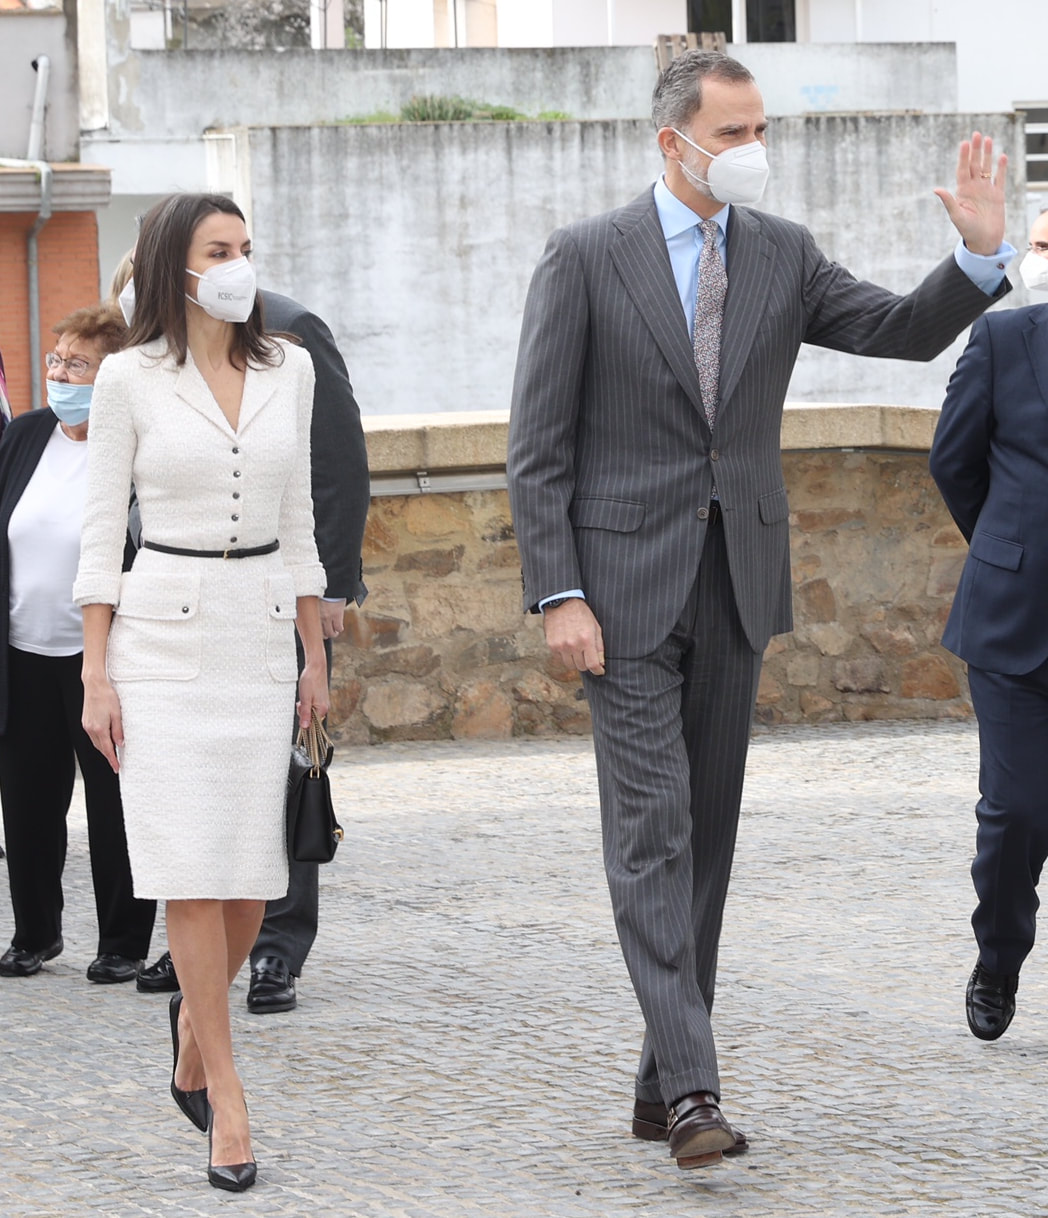 King Felipe VI and Queen Letizia of Spain attended the inauguration Helga de Alvear Contemporary Art Museum on 25 February 2021